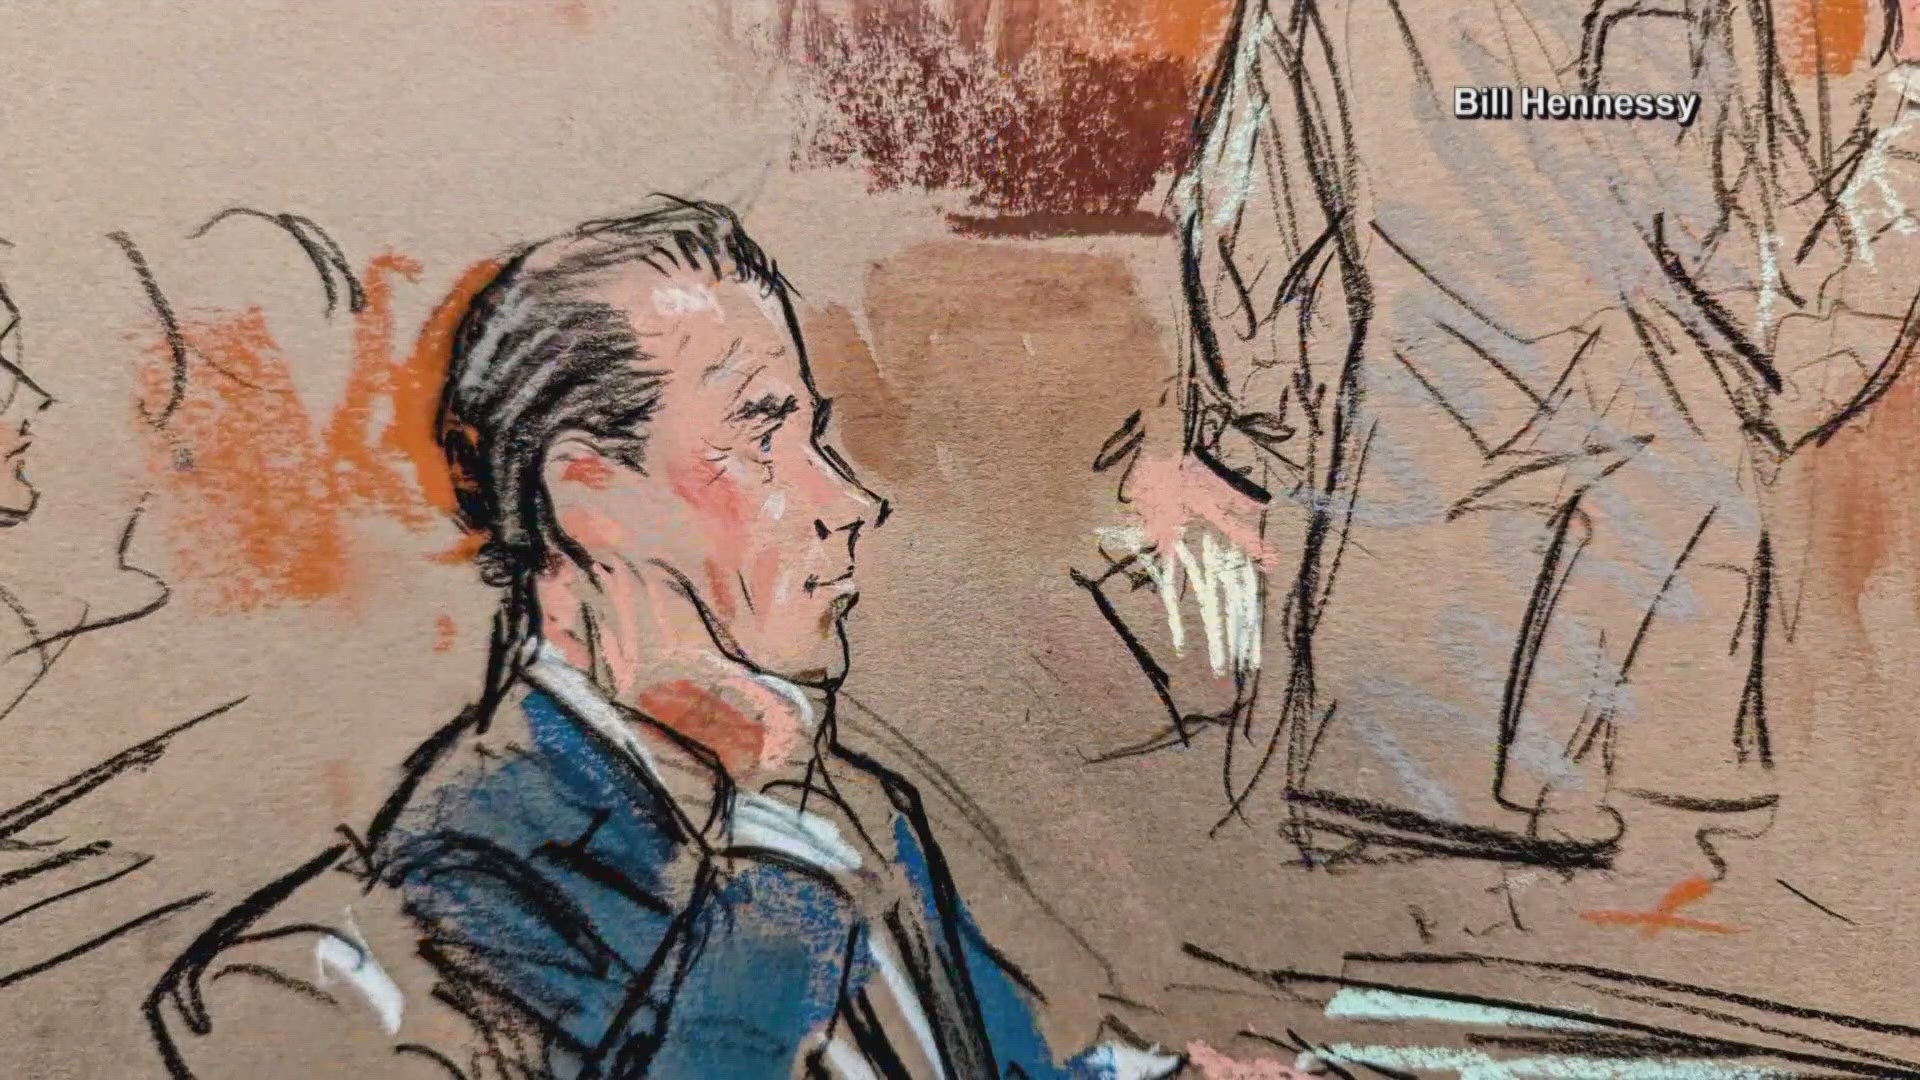 Prosecutors say Hunter Biden lied on a gun purchase form by saying he was not illegally using or addicted to drugs.